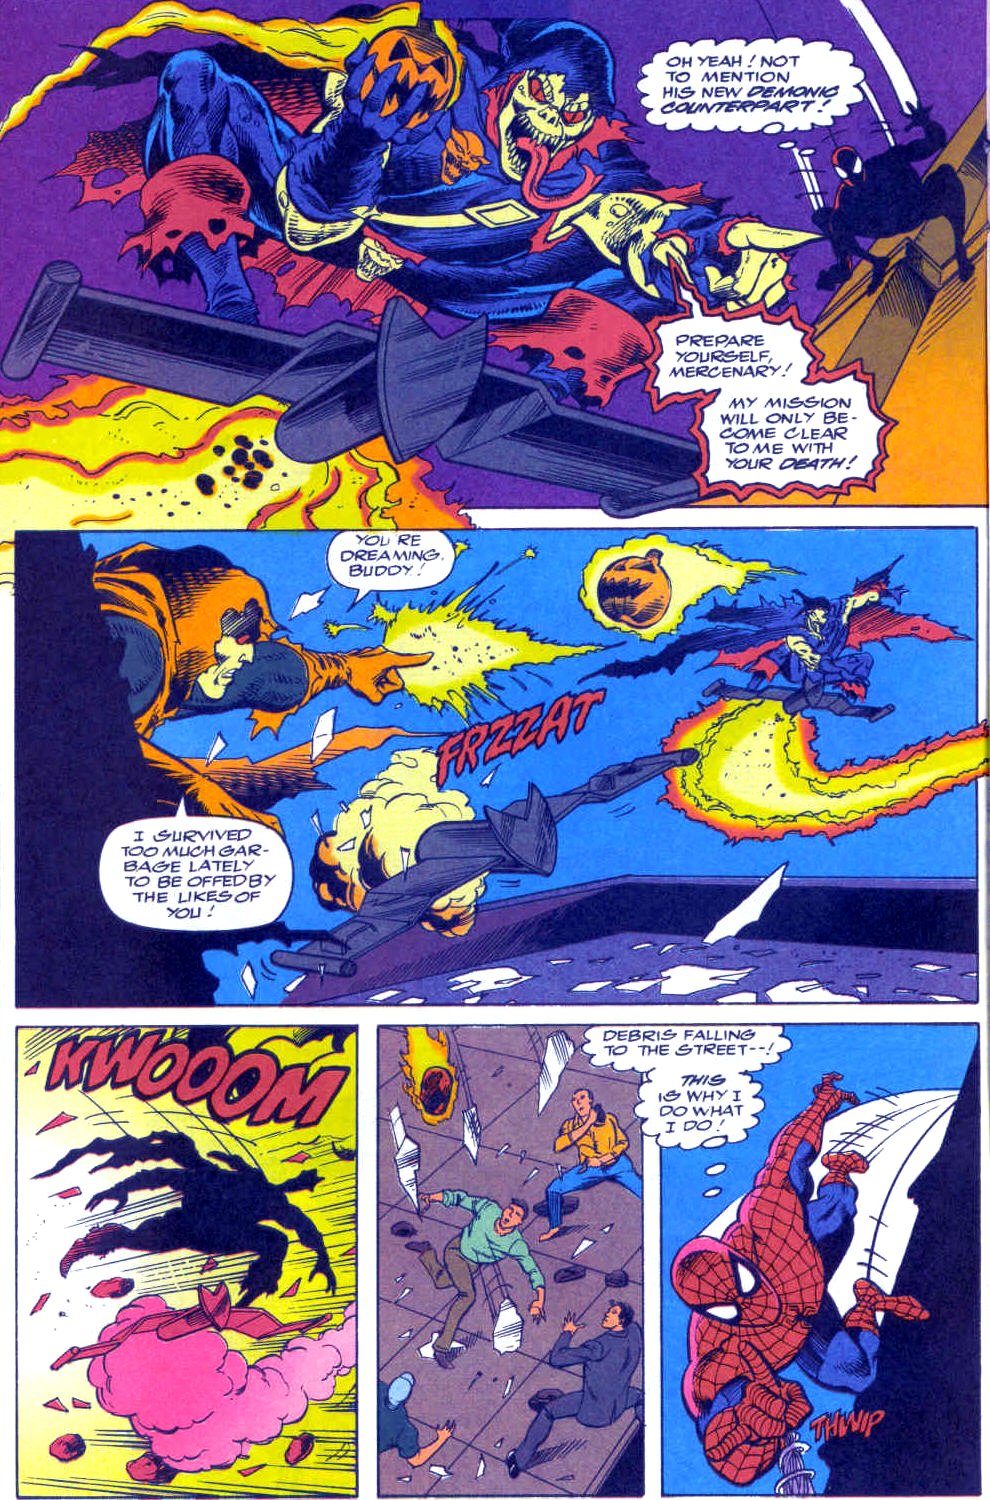 Spider-Man (1990) 24_-_Double_Infinity Page 10